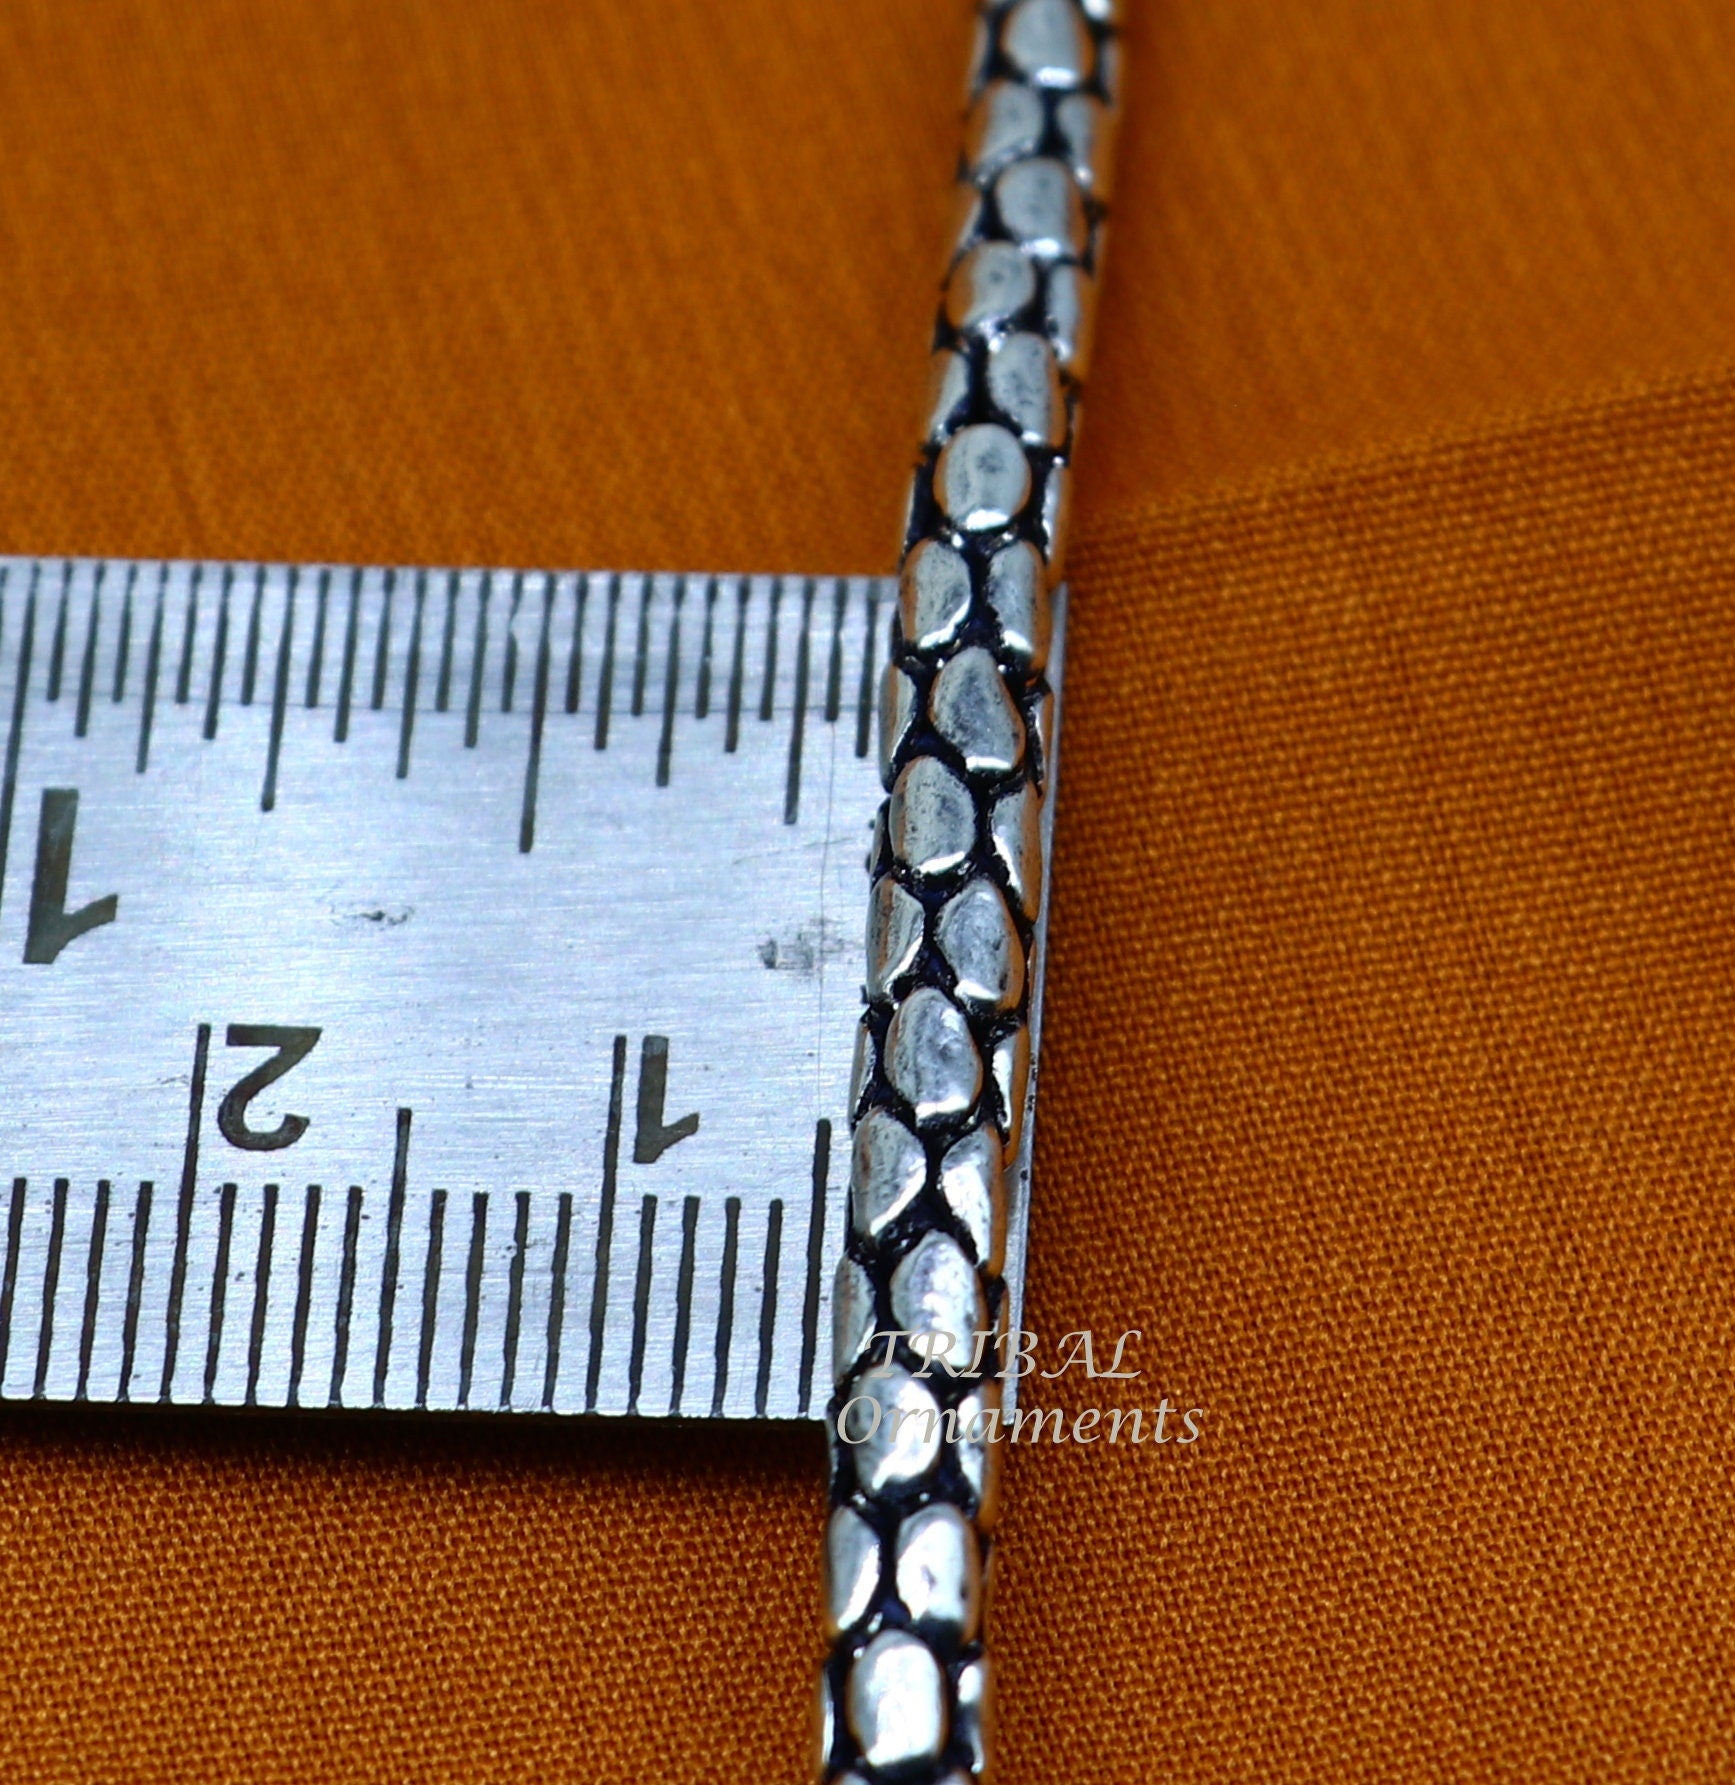 4mm 20" inches unique vintage style chain 925 sterling silver handmade heavy necklace solid oxidized chain necklace tribal jewelry ch207 - TRIBAL ORNAMENTS